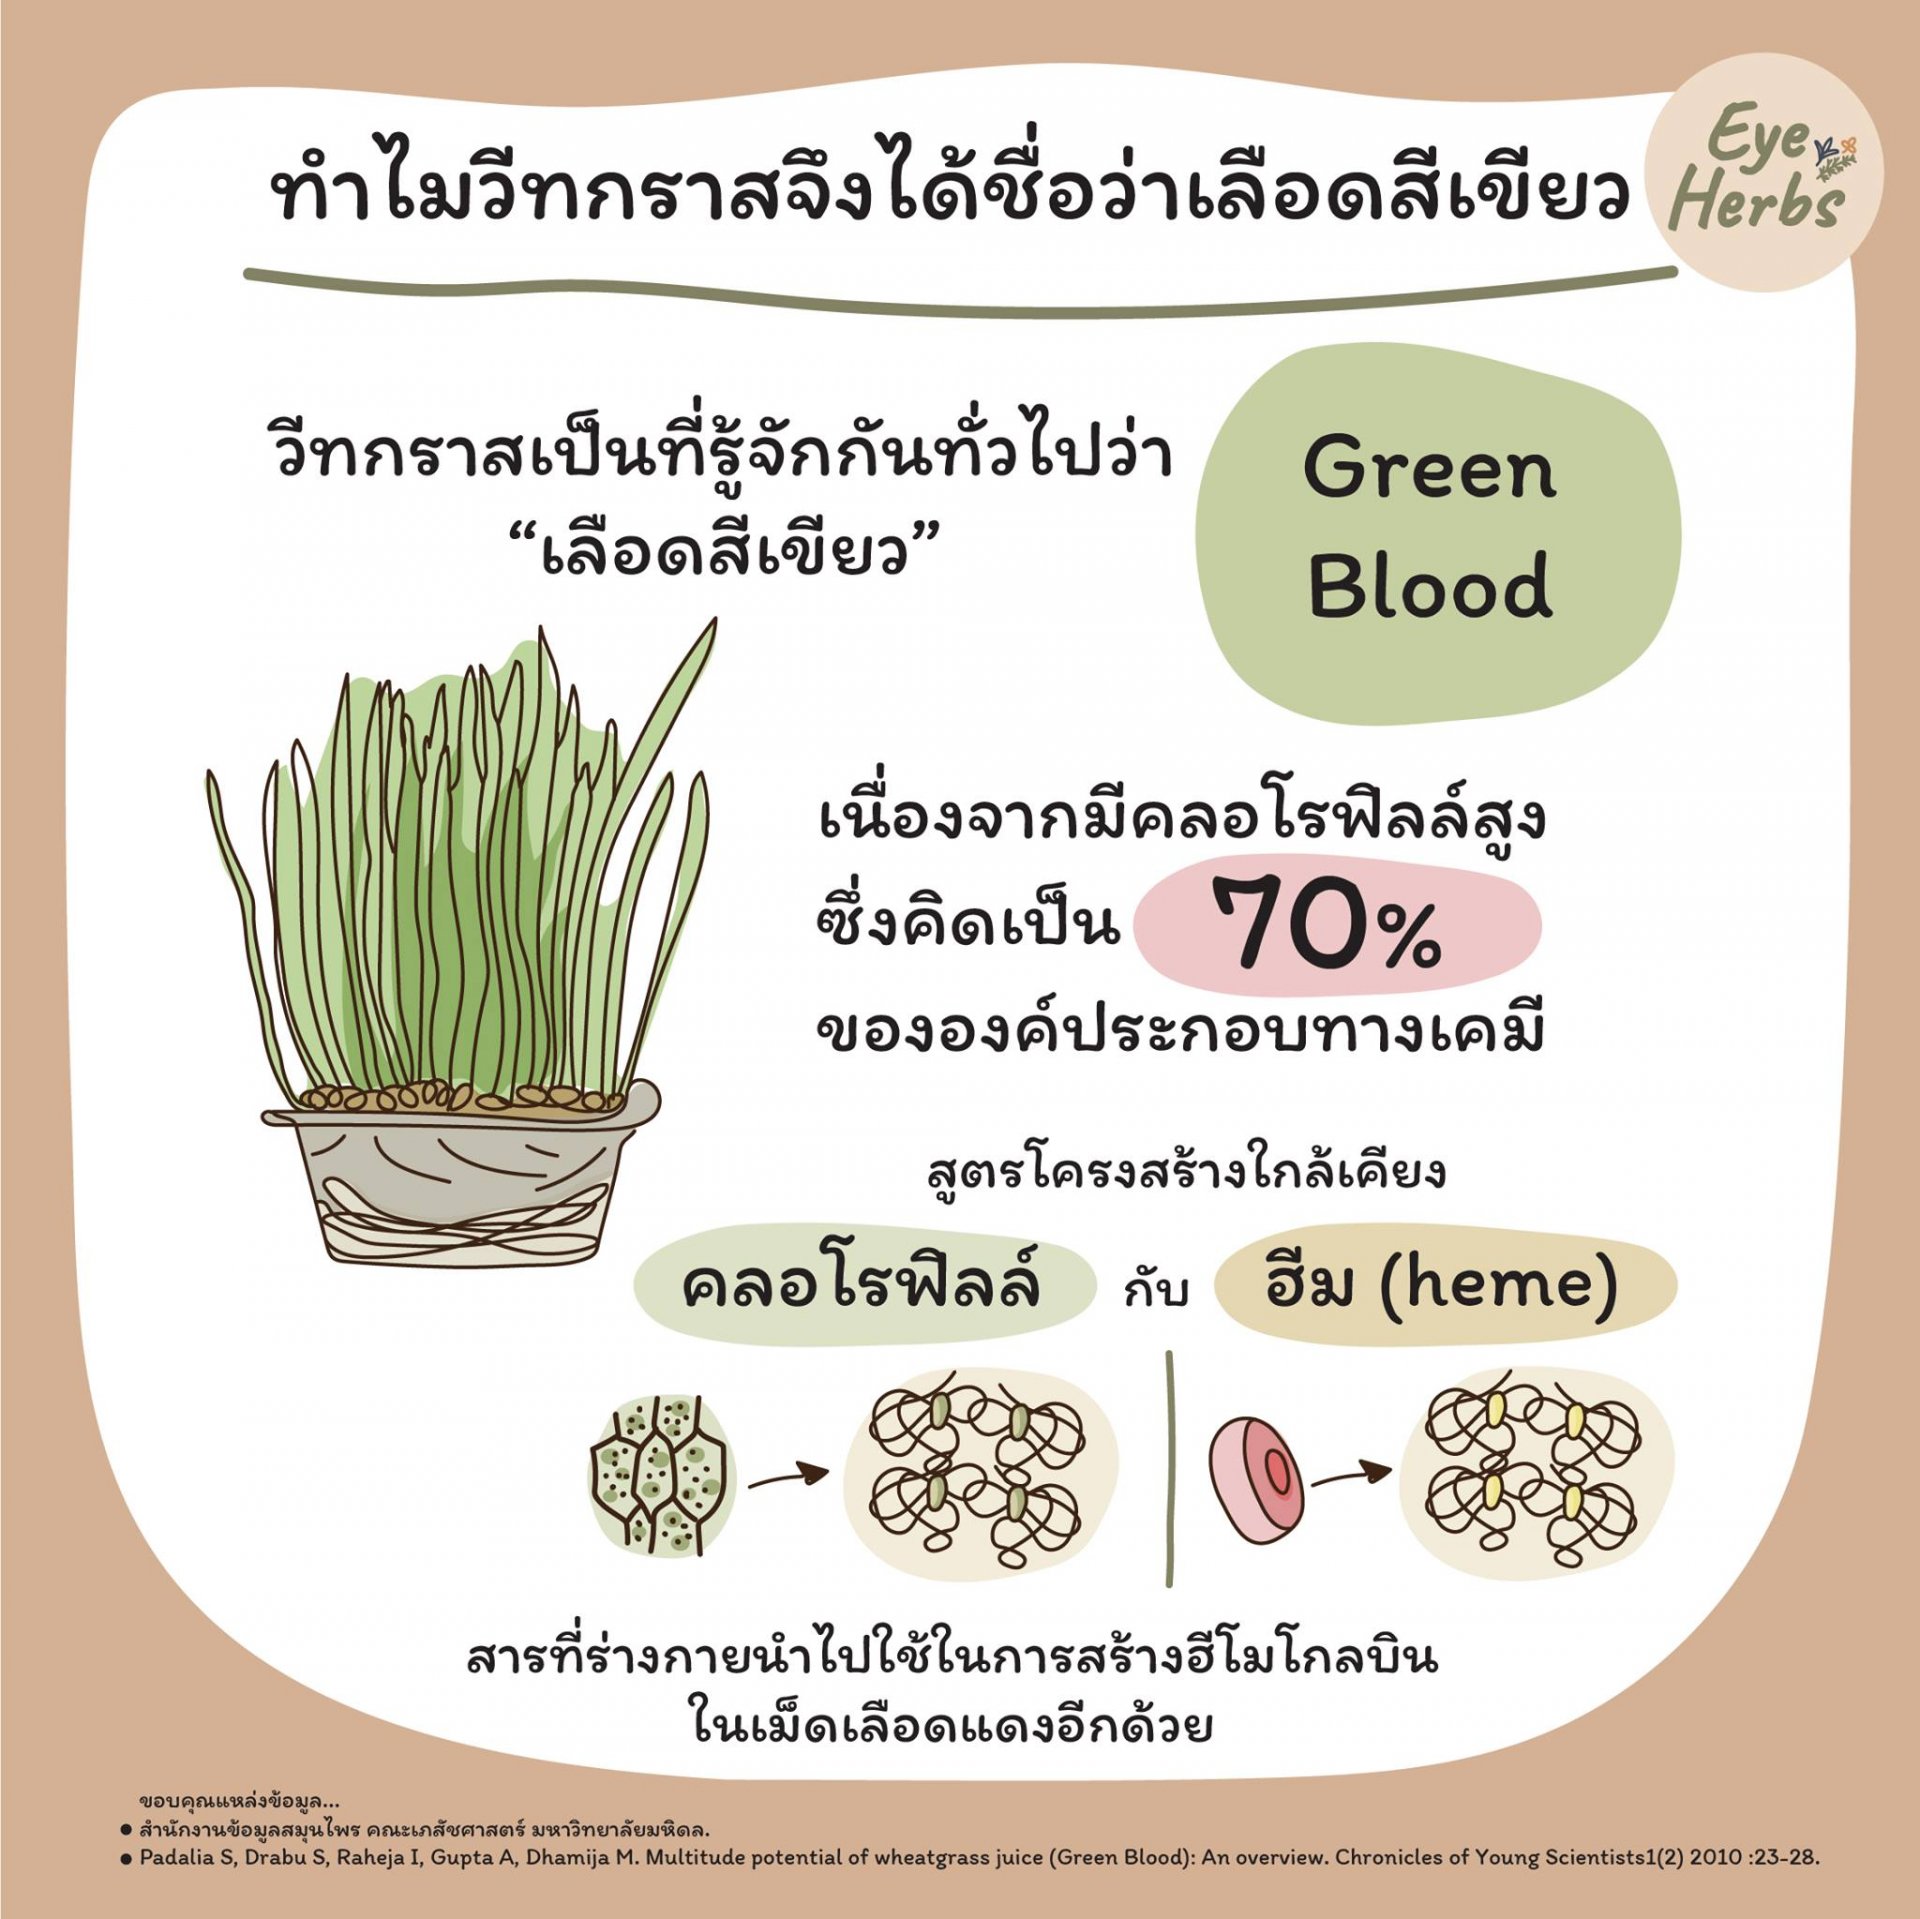 Why is wheatgrass called green blood?